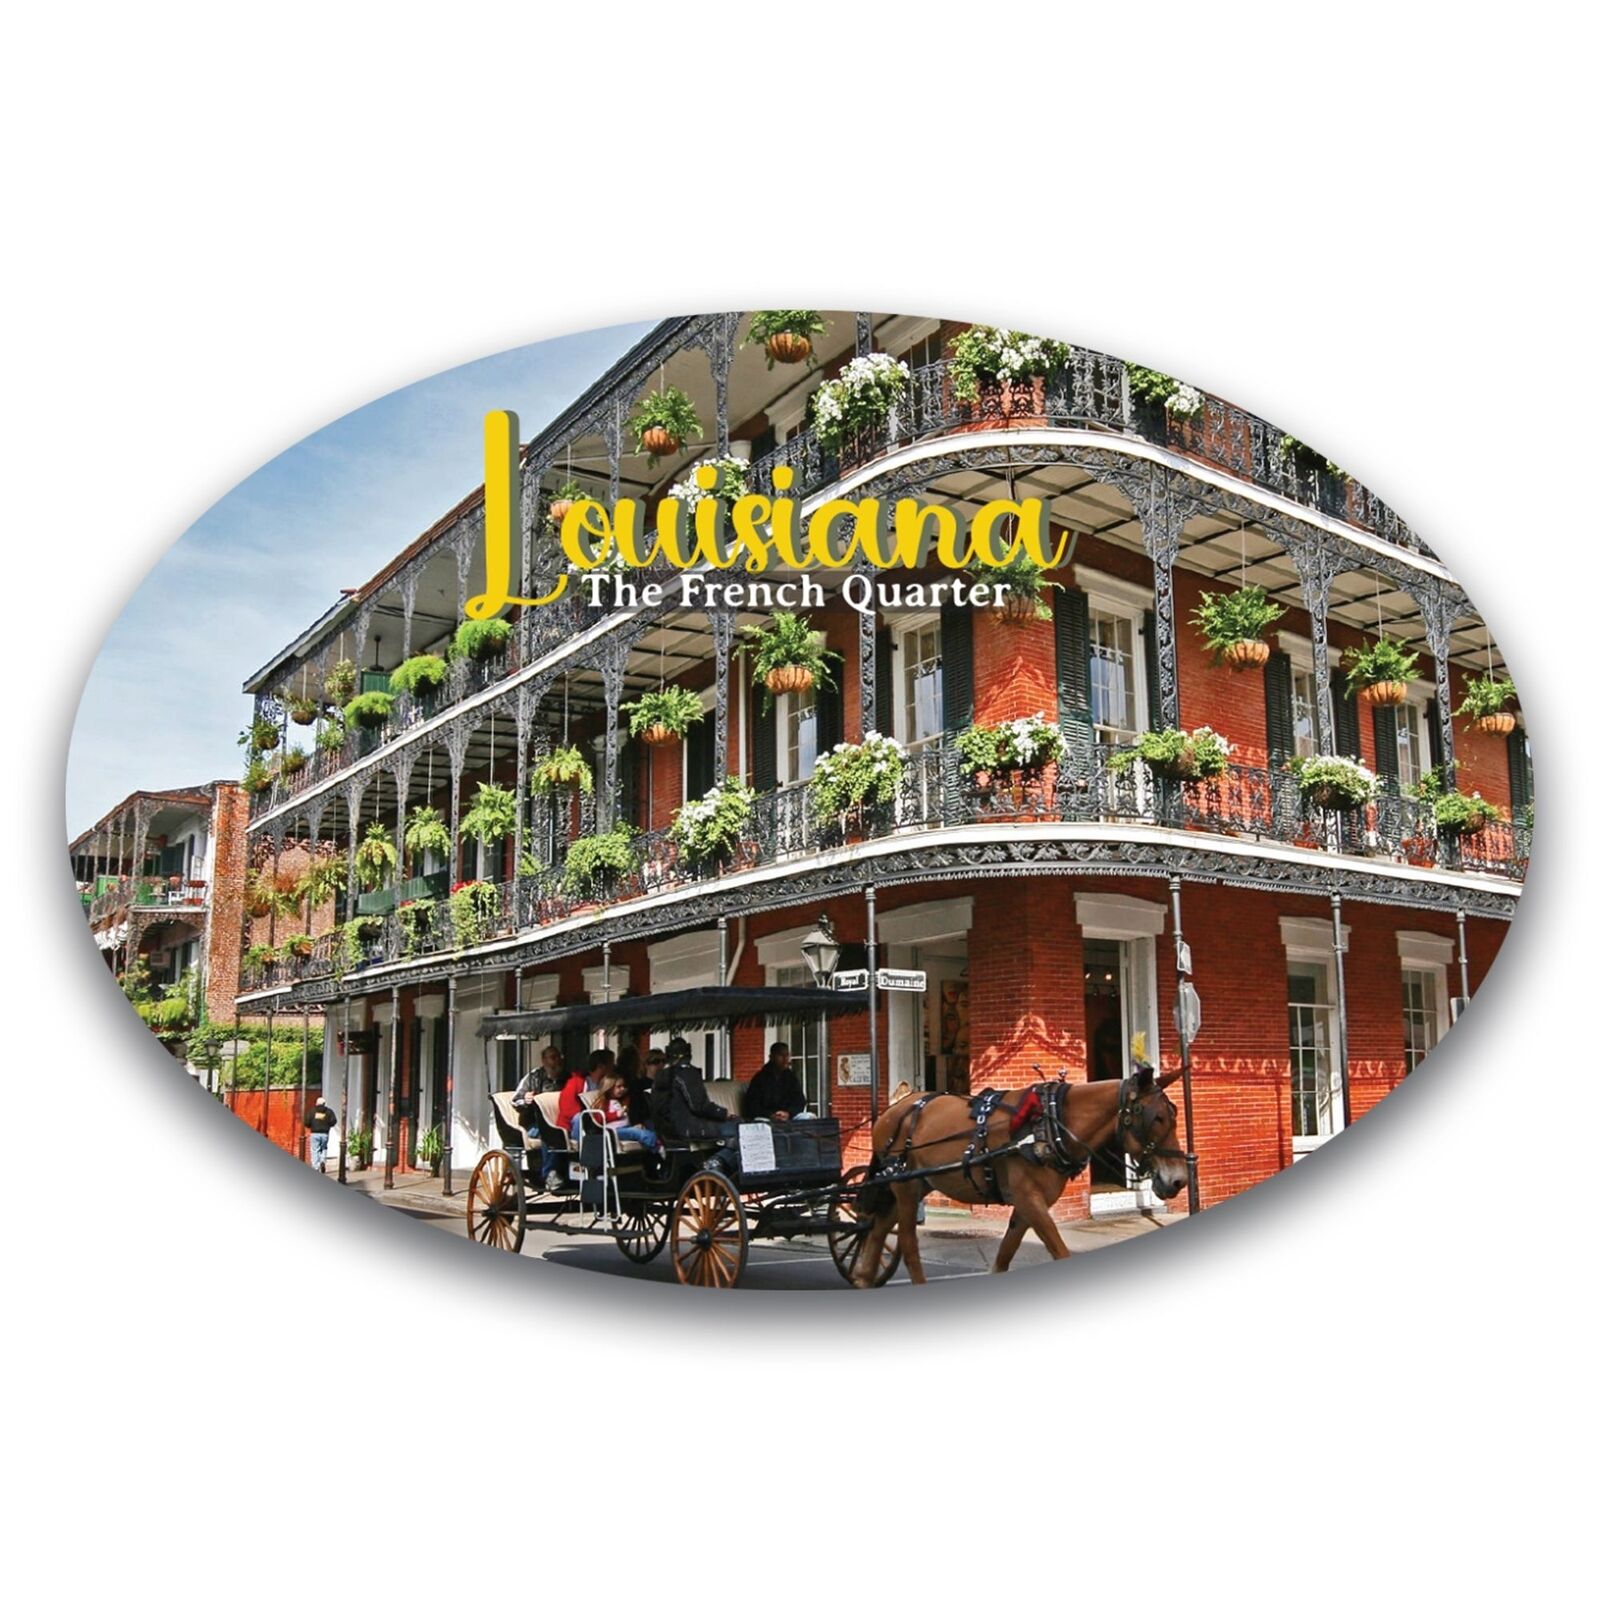 Magnet Me Up Louisiana New Orleans French Quarter Oval Magnet Decal, 4x6 Inches